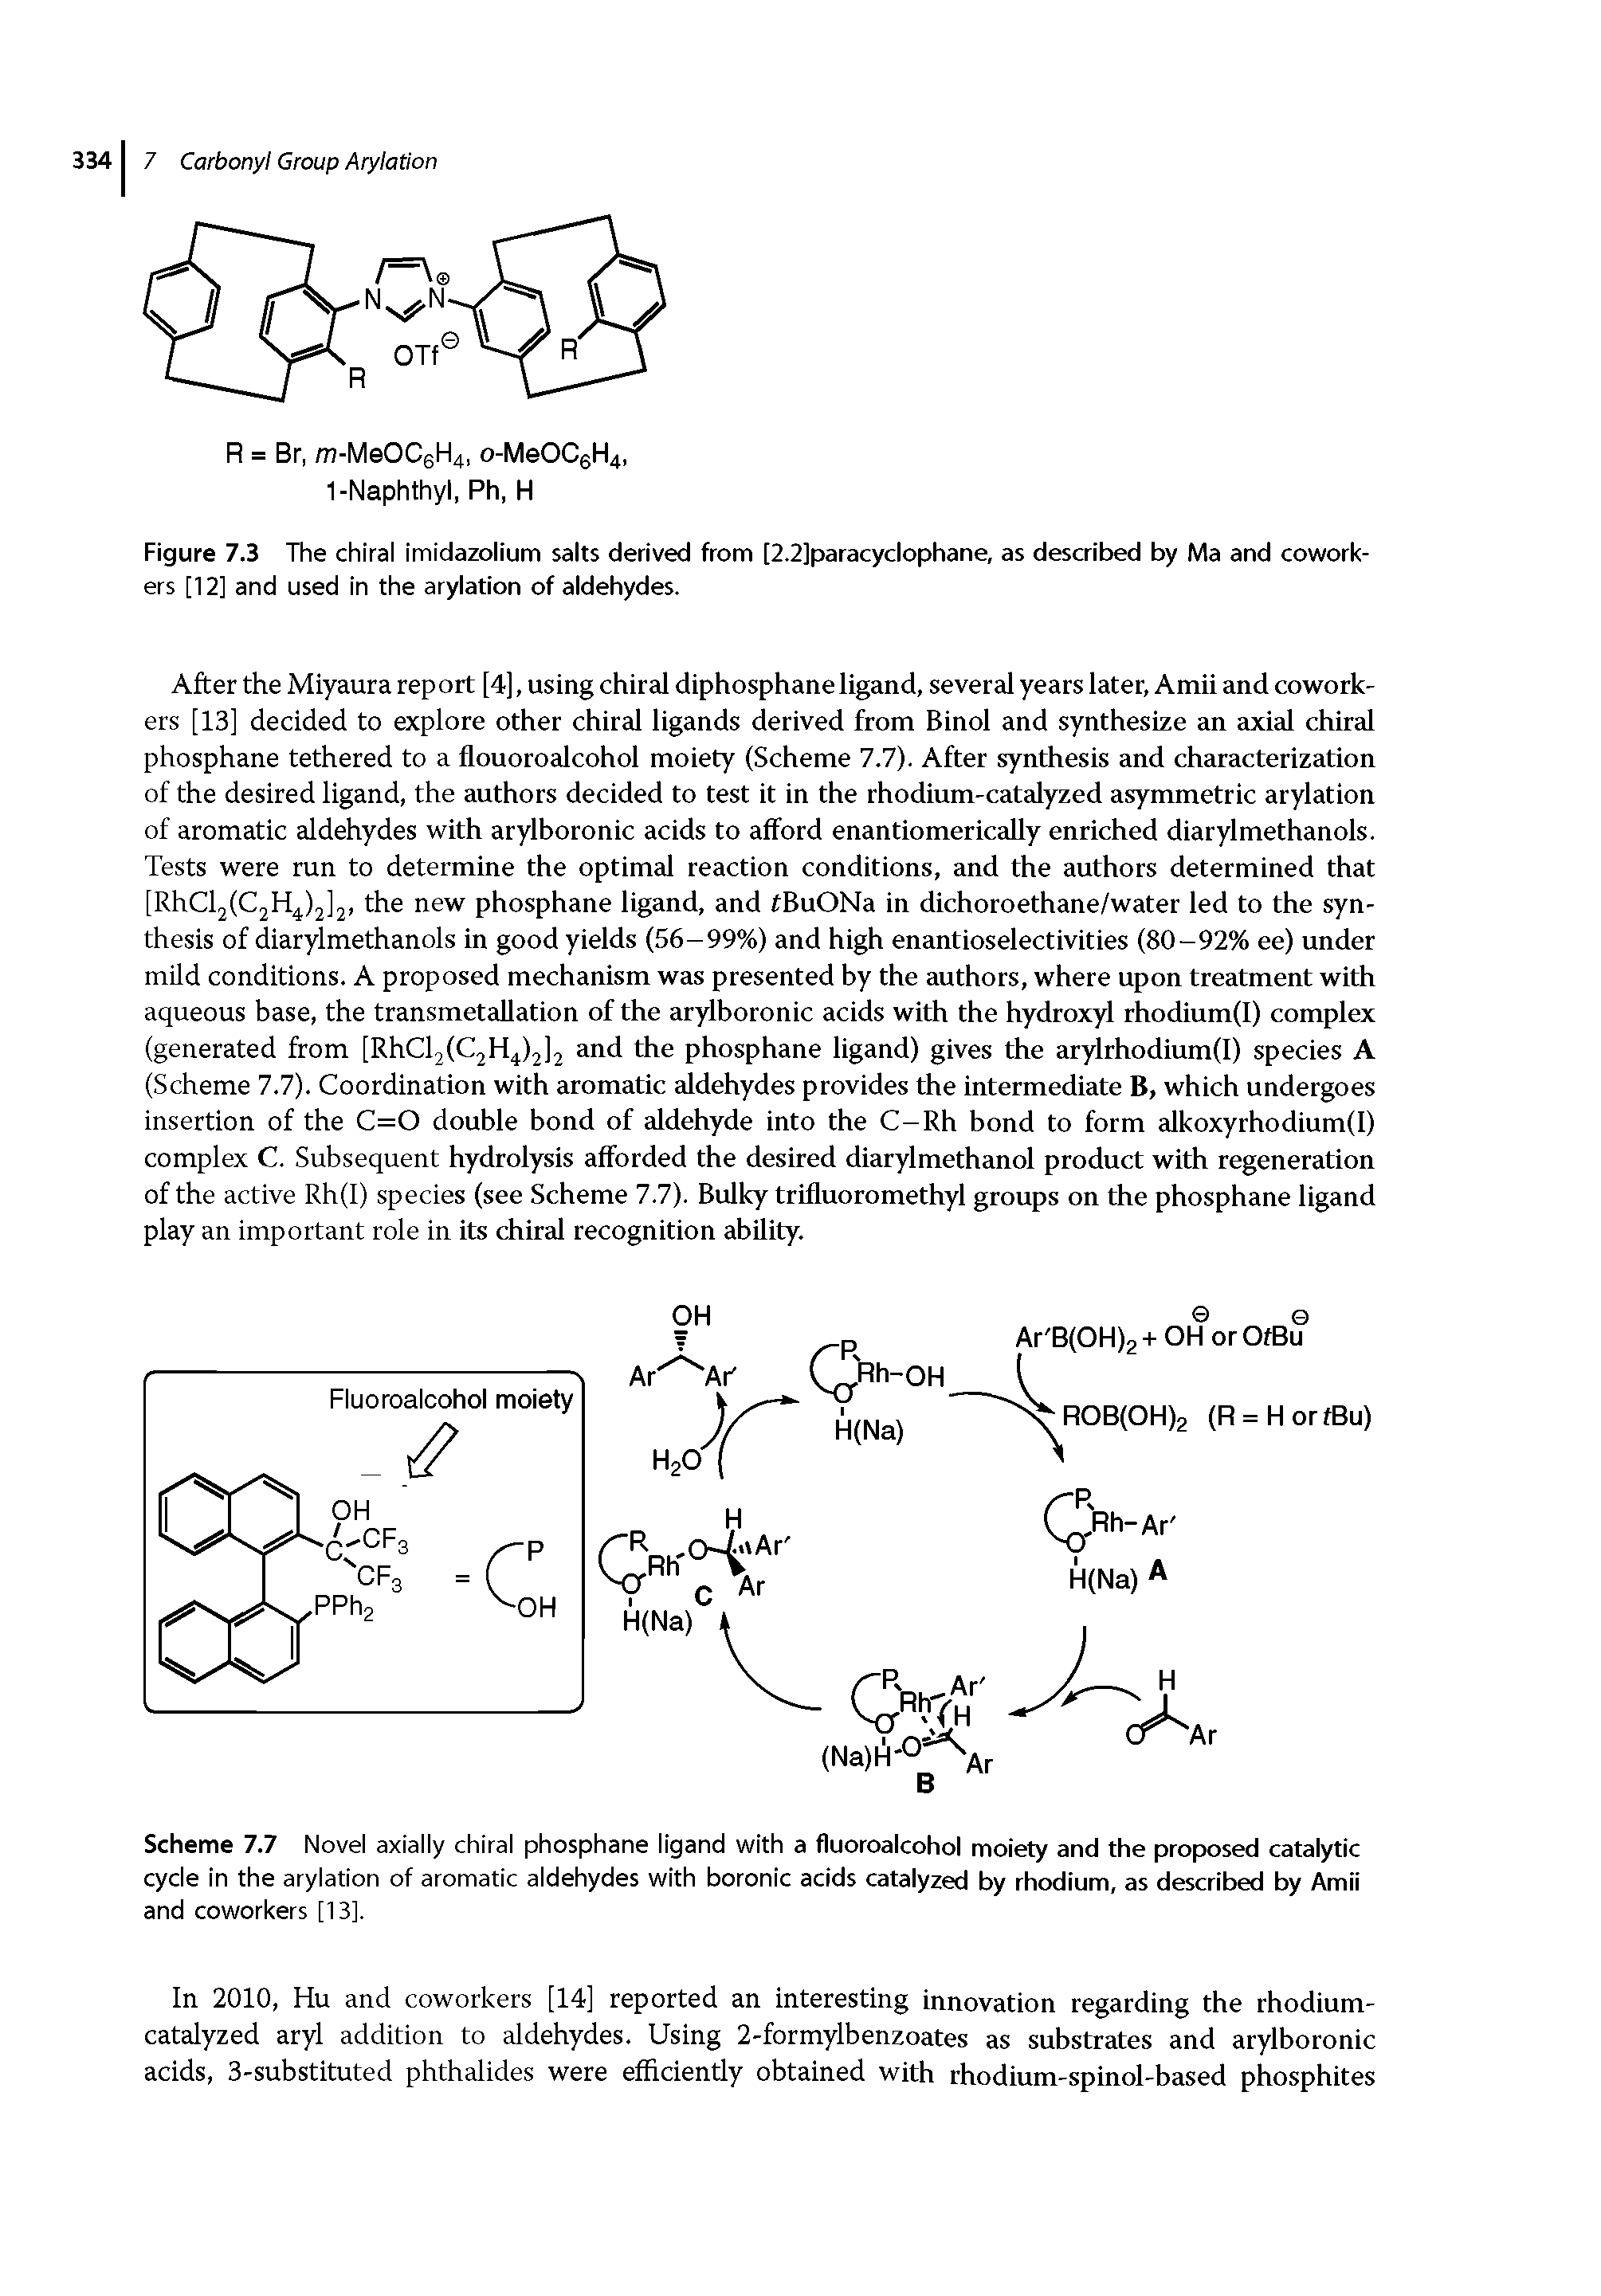 Scheme 7.7 Novel axially chiral phosphane ligand with a fluoroalcohol moiety and the proposed catalytic cycle in the arylation of aromatic aldehydes with boronic acids catalyzed by rhodium, as described by Amii and coworkers [13].